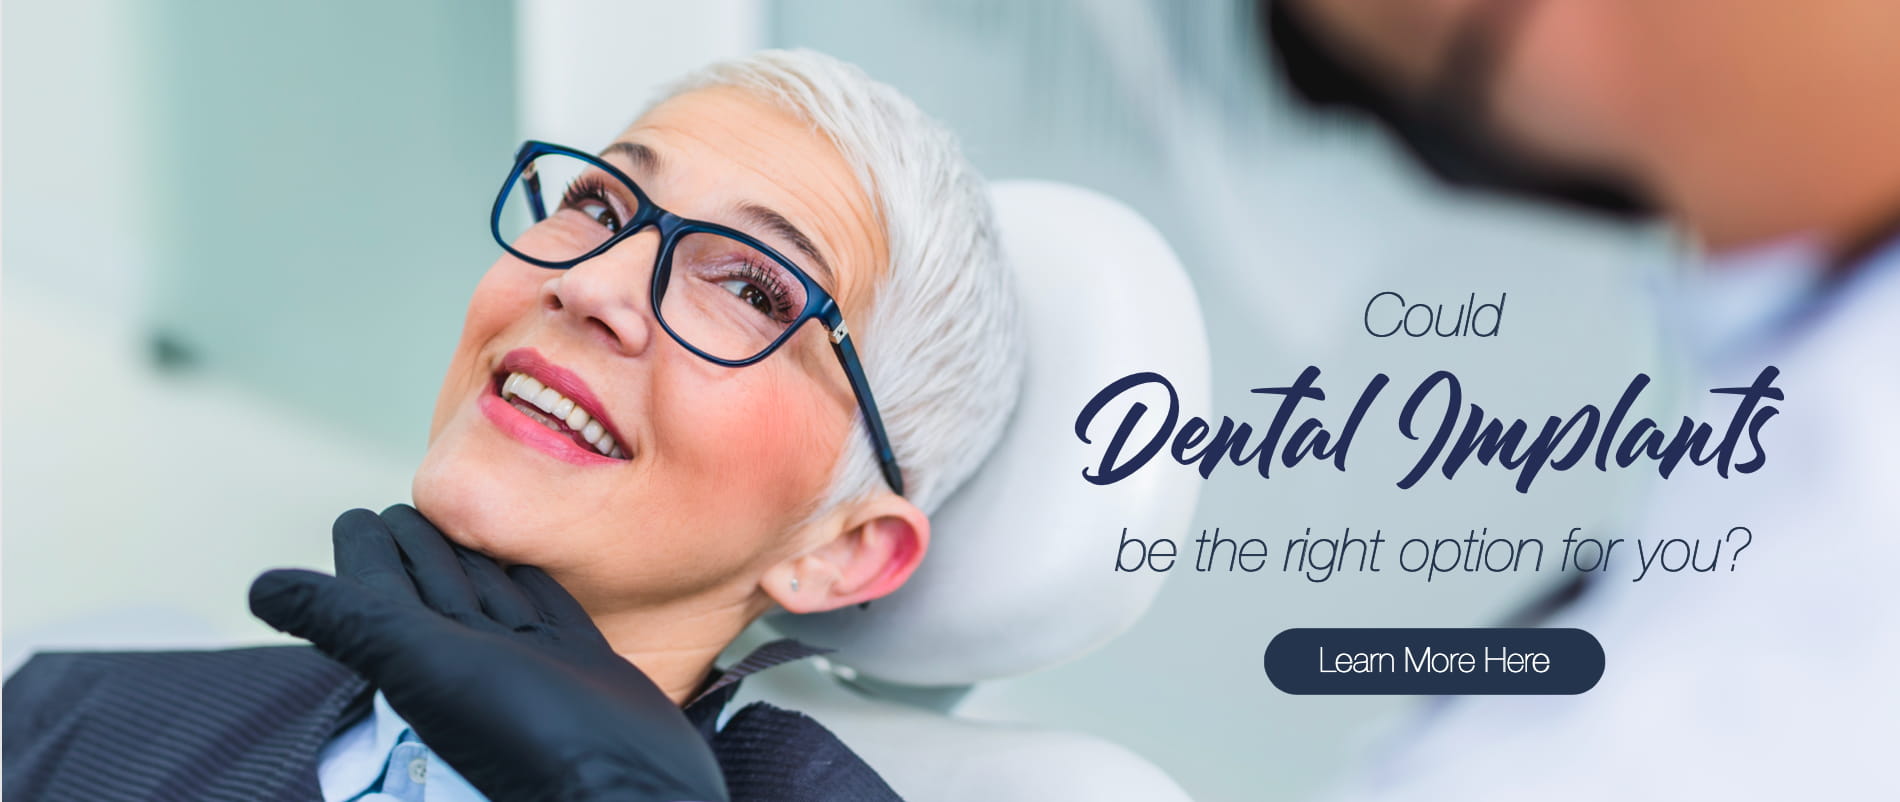 Could dental implants be the right option for you?